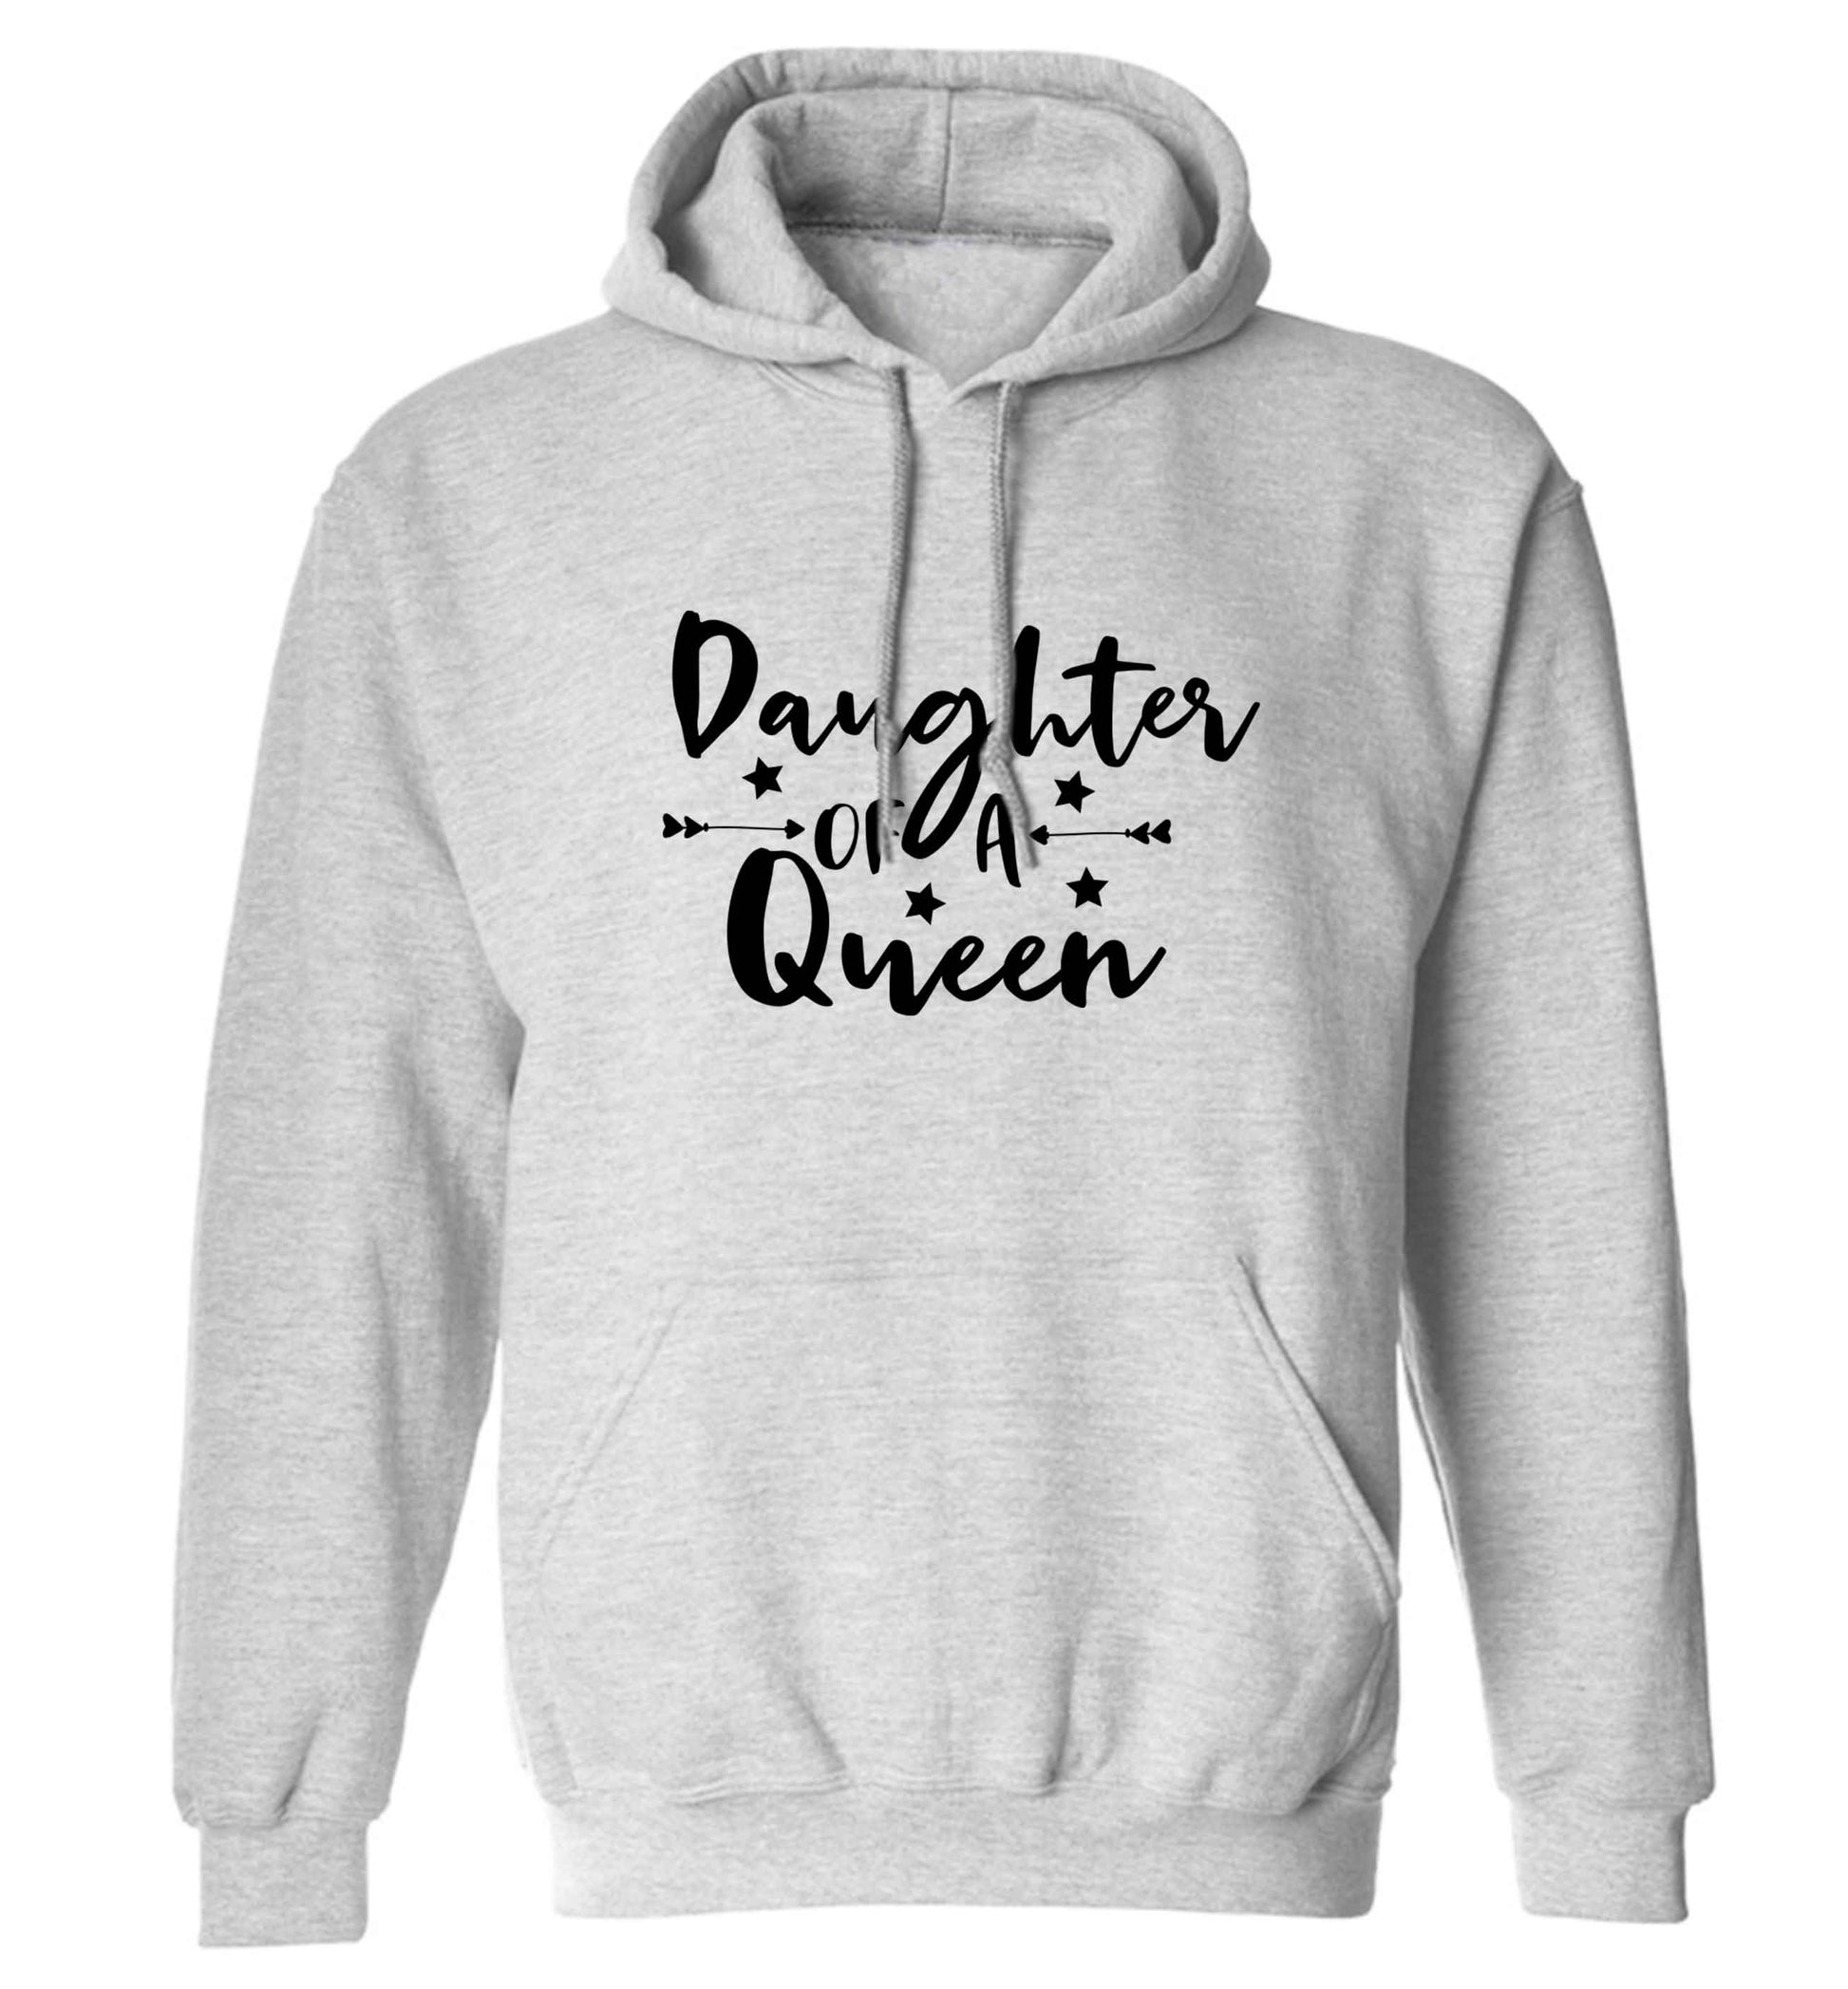 Daughter of a Queen adults unisex grey hoodie 2XL